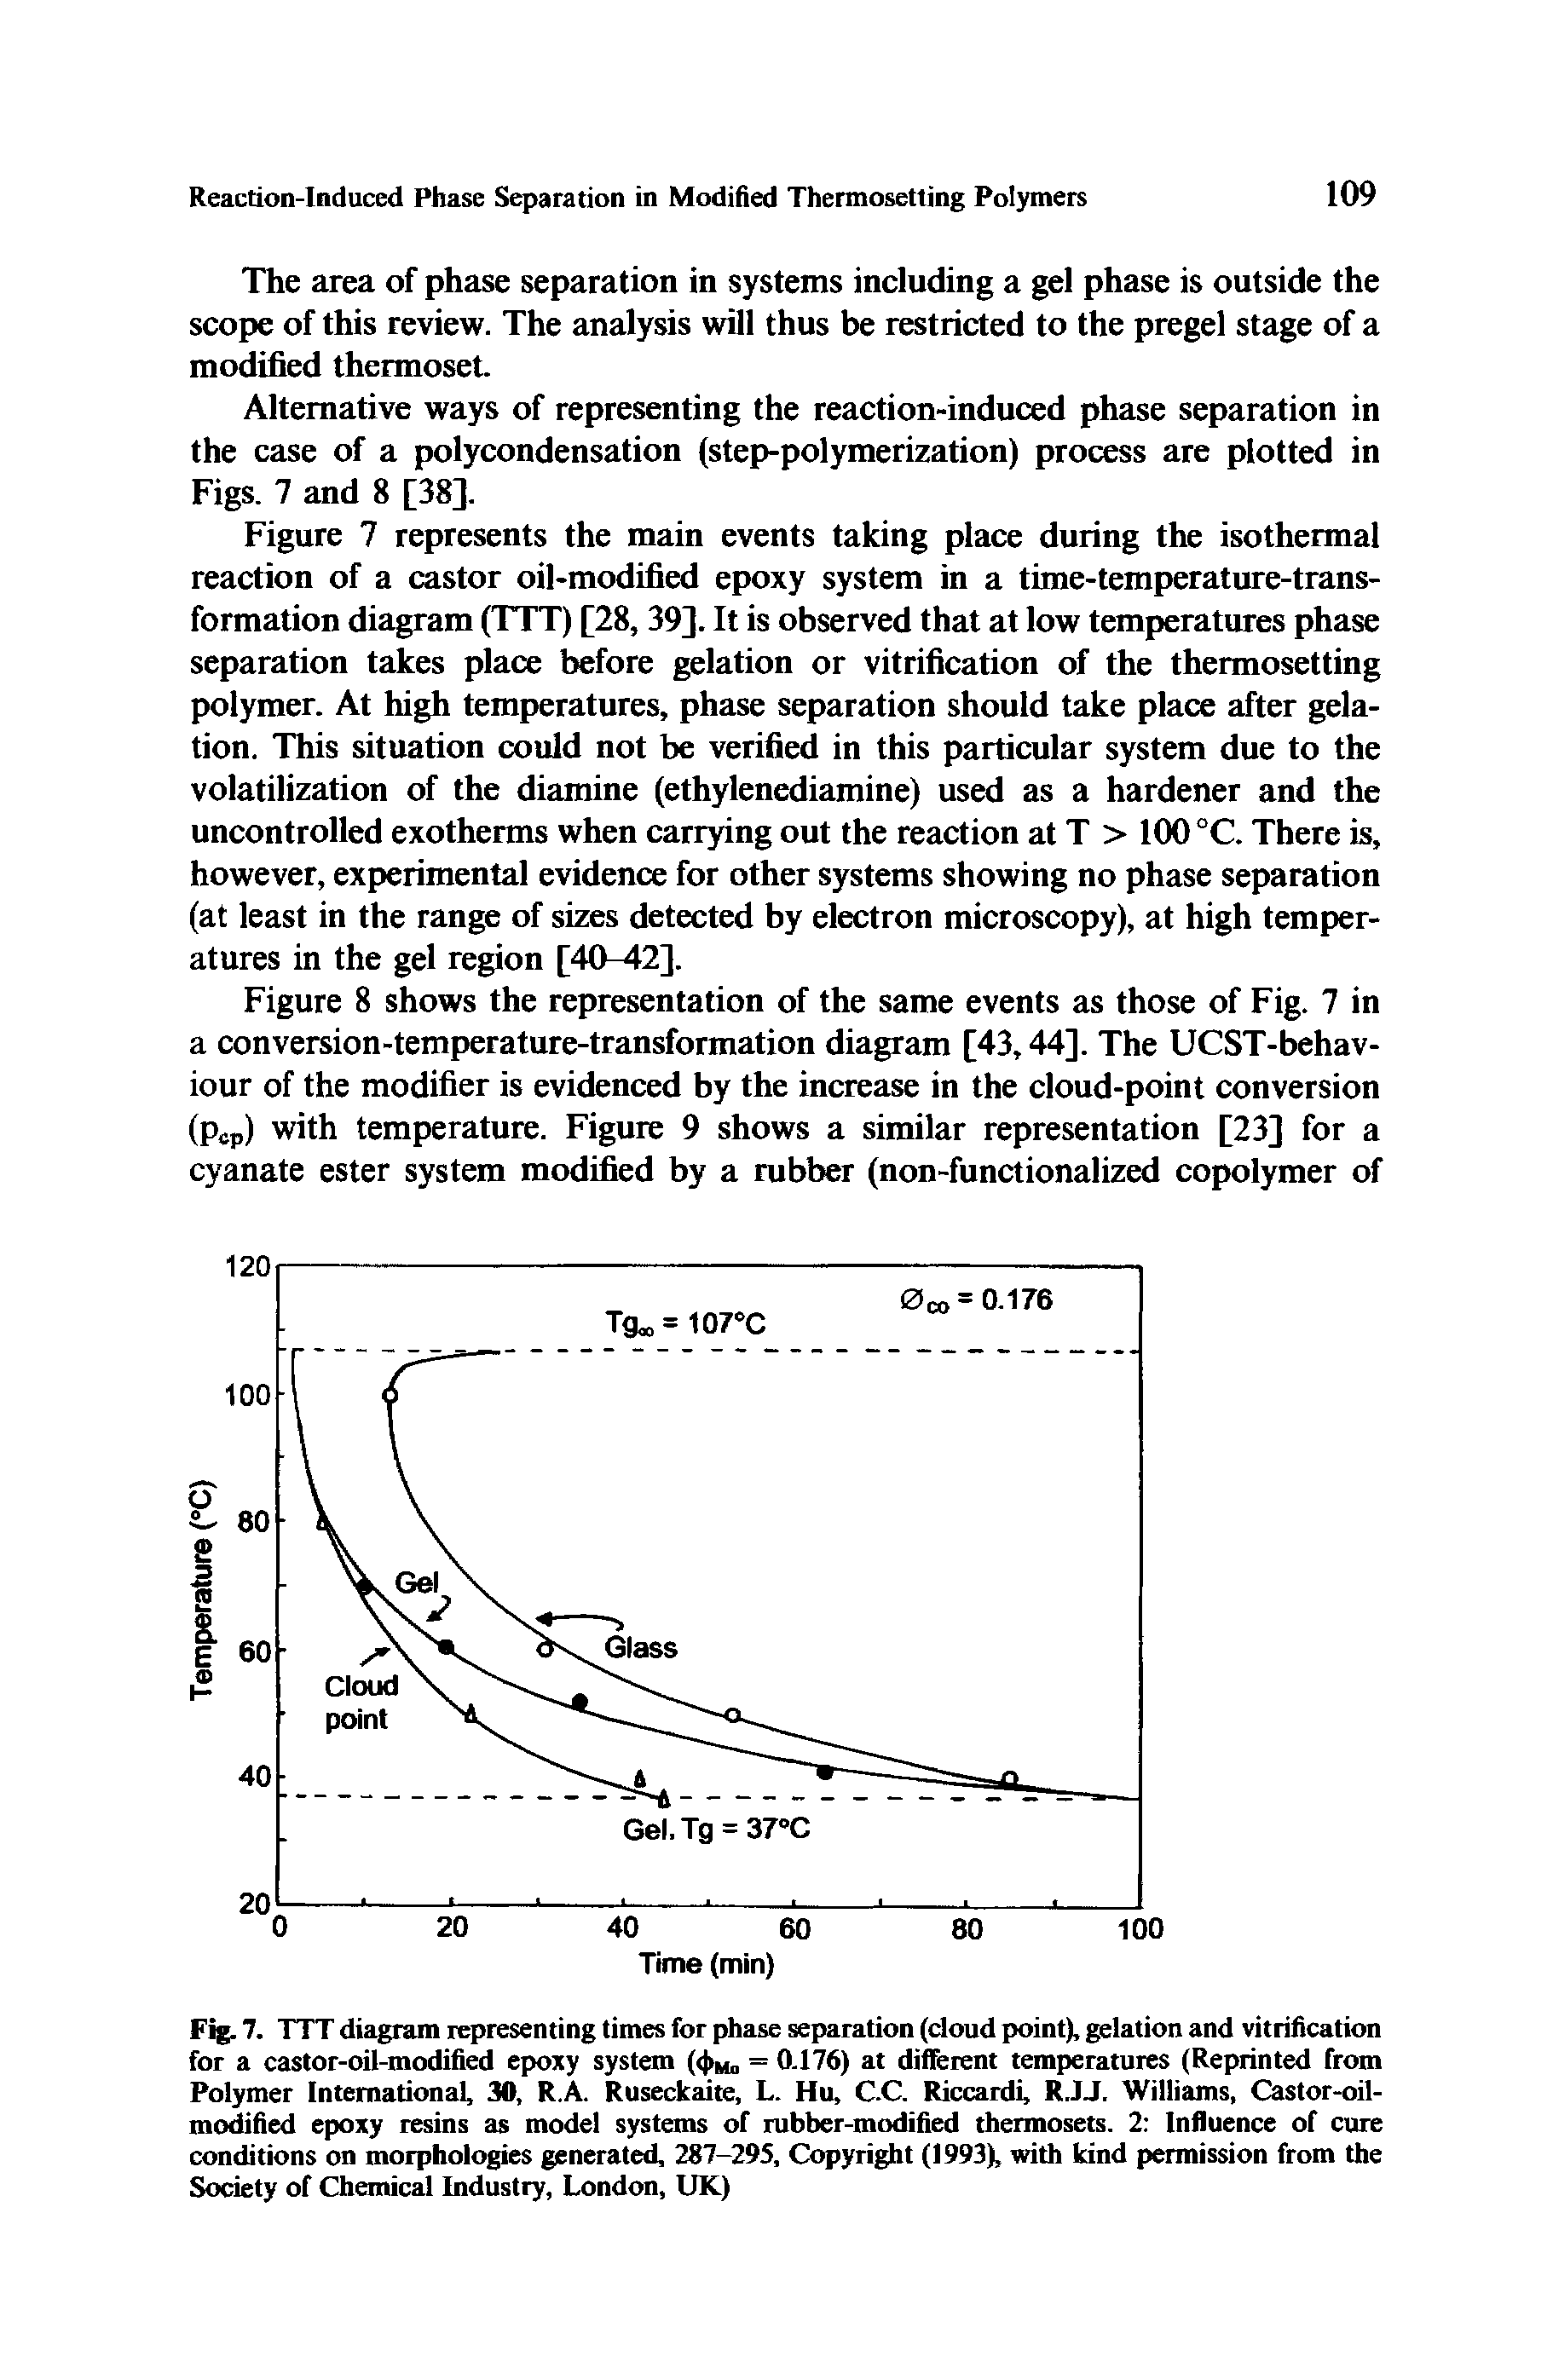 Fig. 7. TTT diagram representing times for phase separation (doud point), gelation and vitrification for a castor-oil-modified epoxy system (4ho = 0.176) at different temperatures (Reprinted from Polymer International, 30, R.A. Ruseckaite, L. Hu, CC. Riccardi, R.JJ. Williams, Castor-oil-modified epoxy resins as model systems of rubber-modified thermosets. 2 Influence of cure conditions on morphologies generated, 287-295, Copyright (1993), with kind permission from the Society of Chemic Industry, London, UK)...